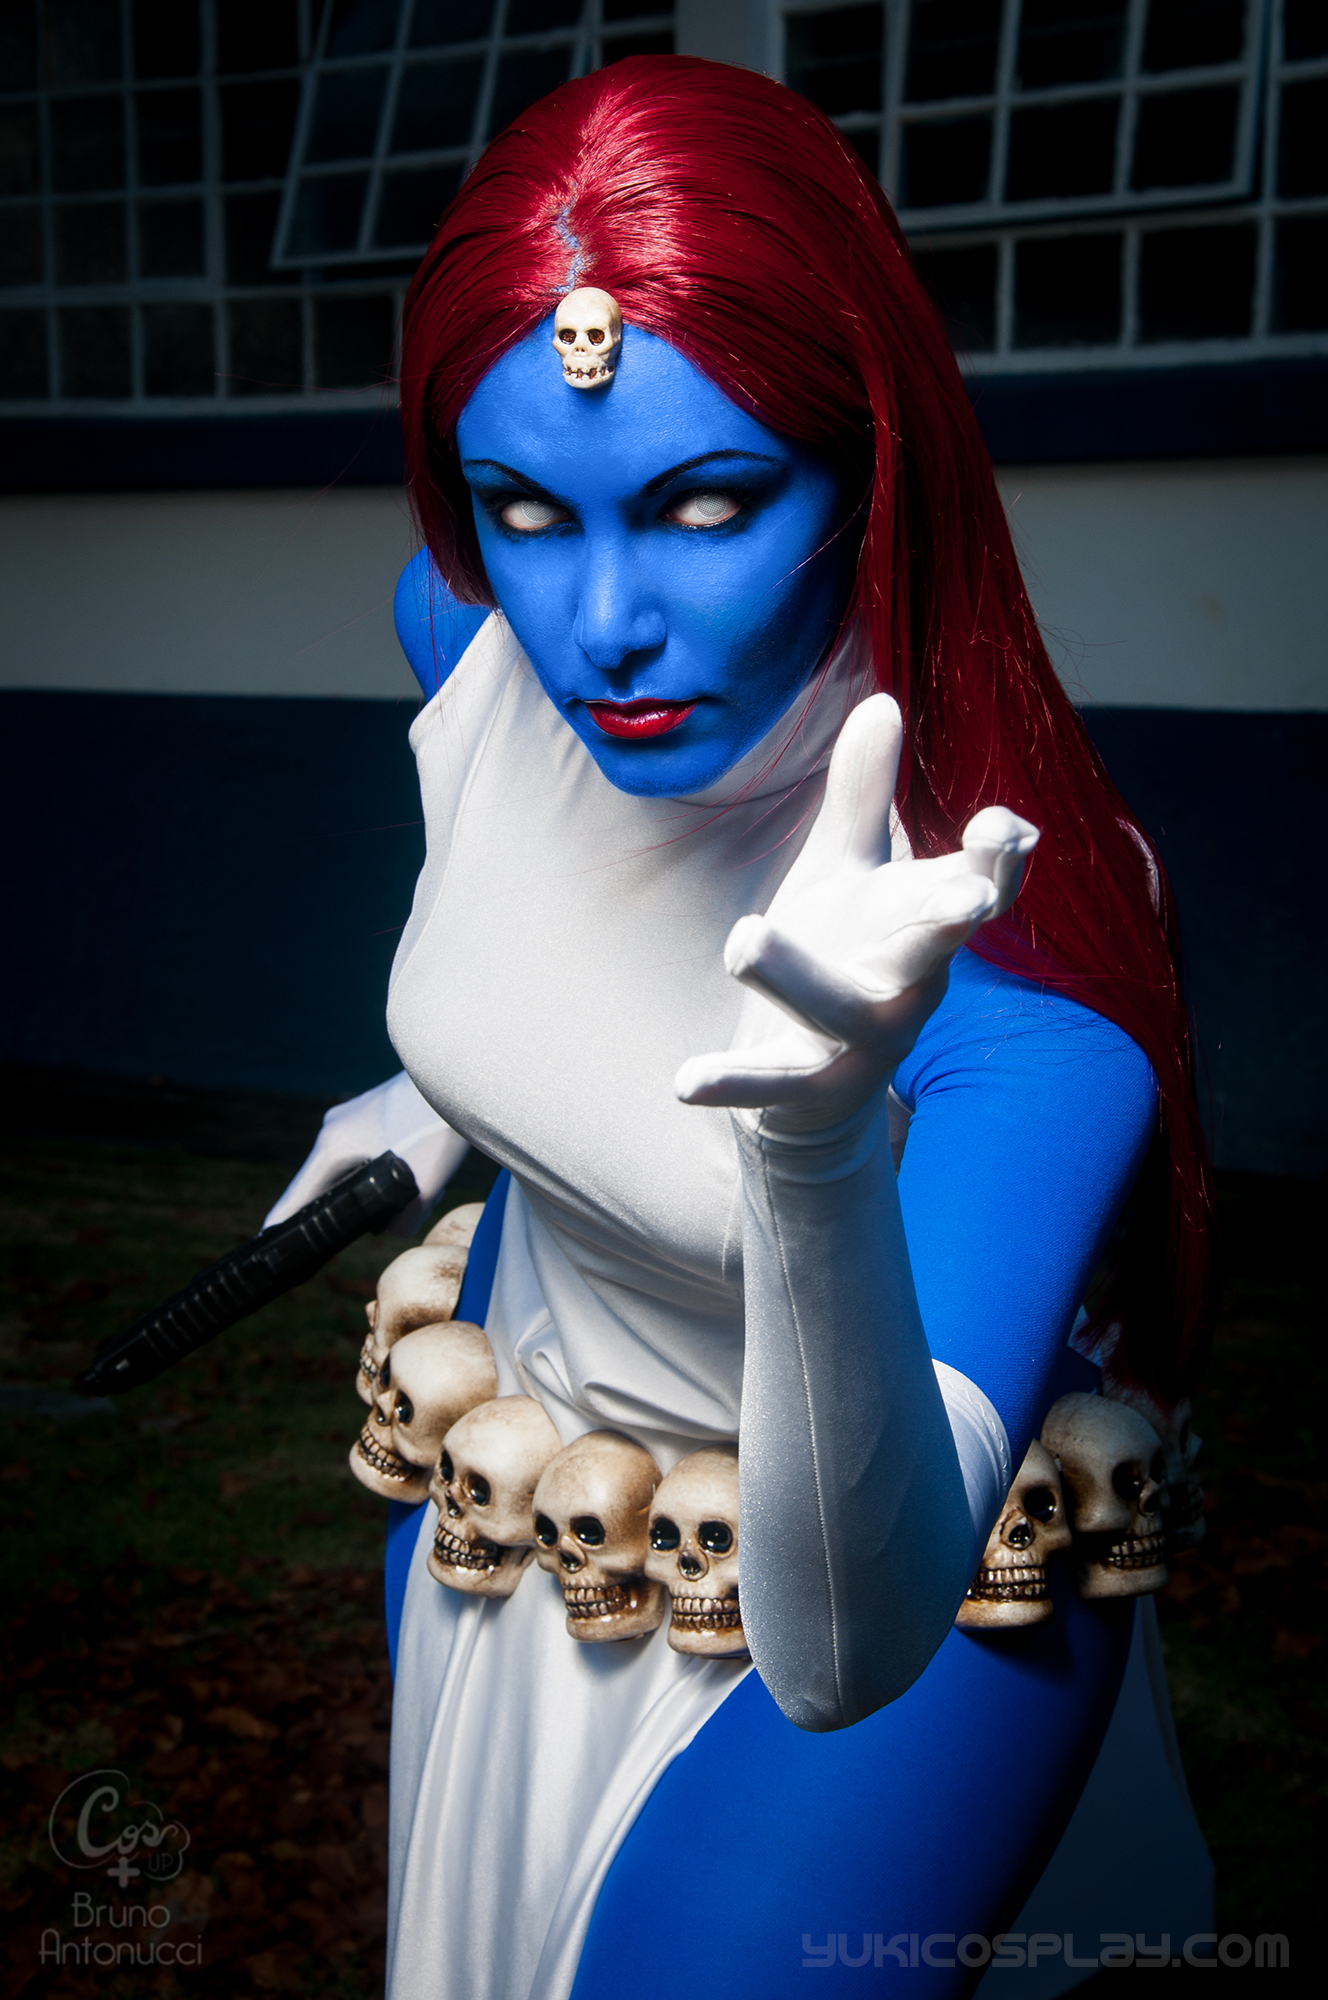 Best Cosplay Images On Pinterest Cosplay Girls History And Outfits 1